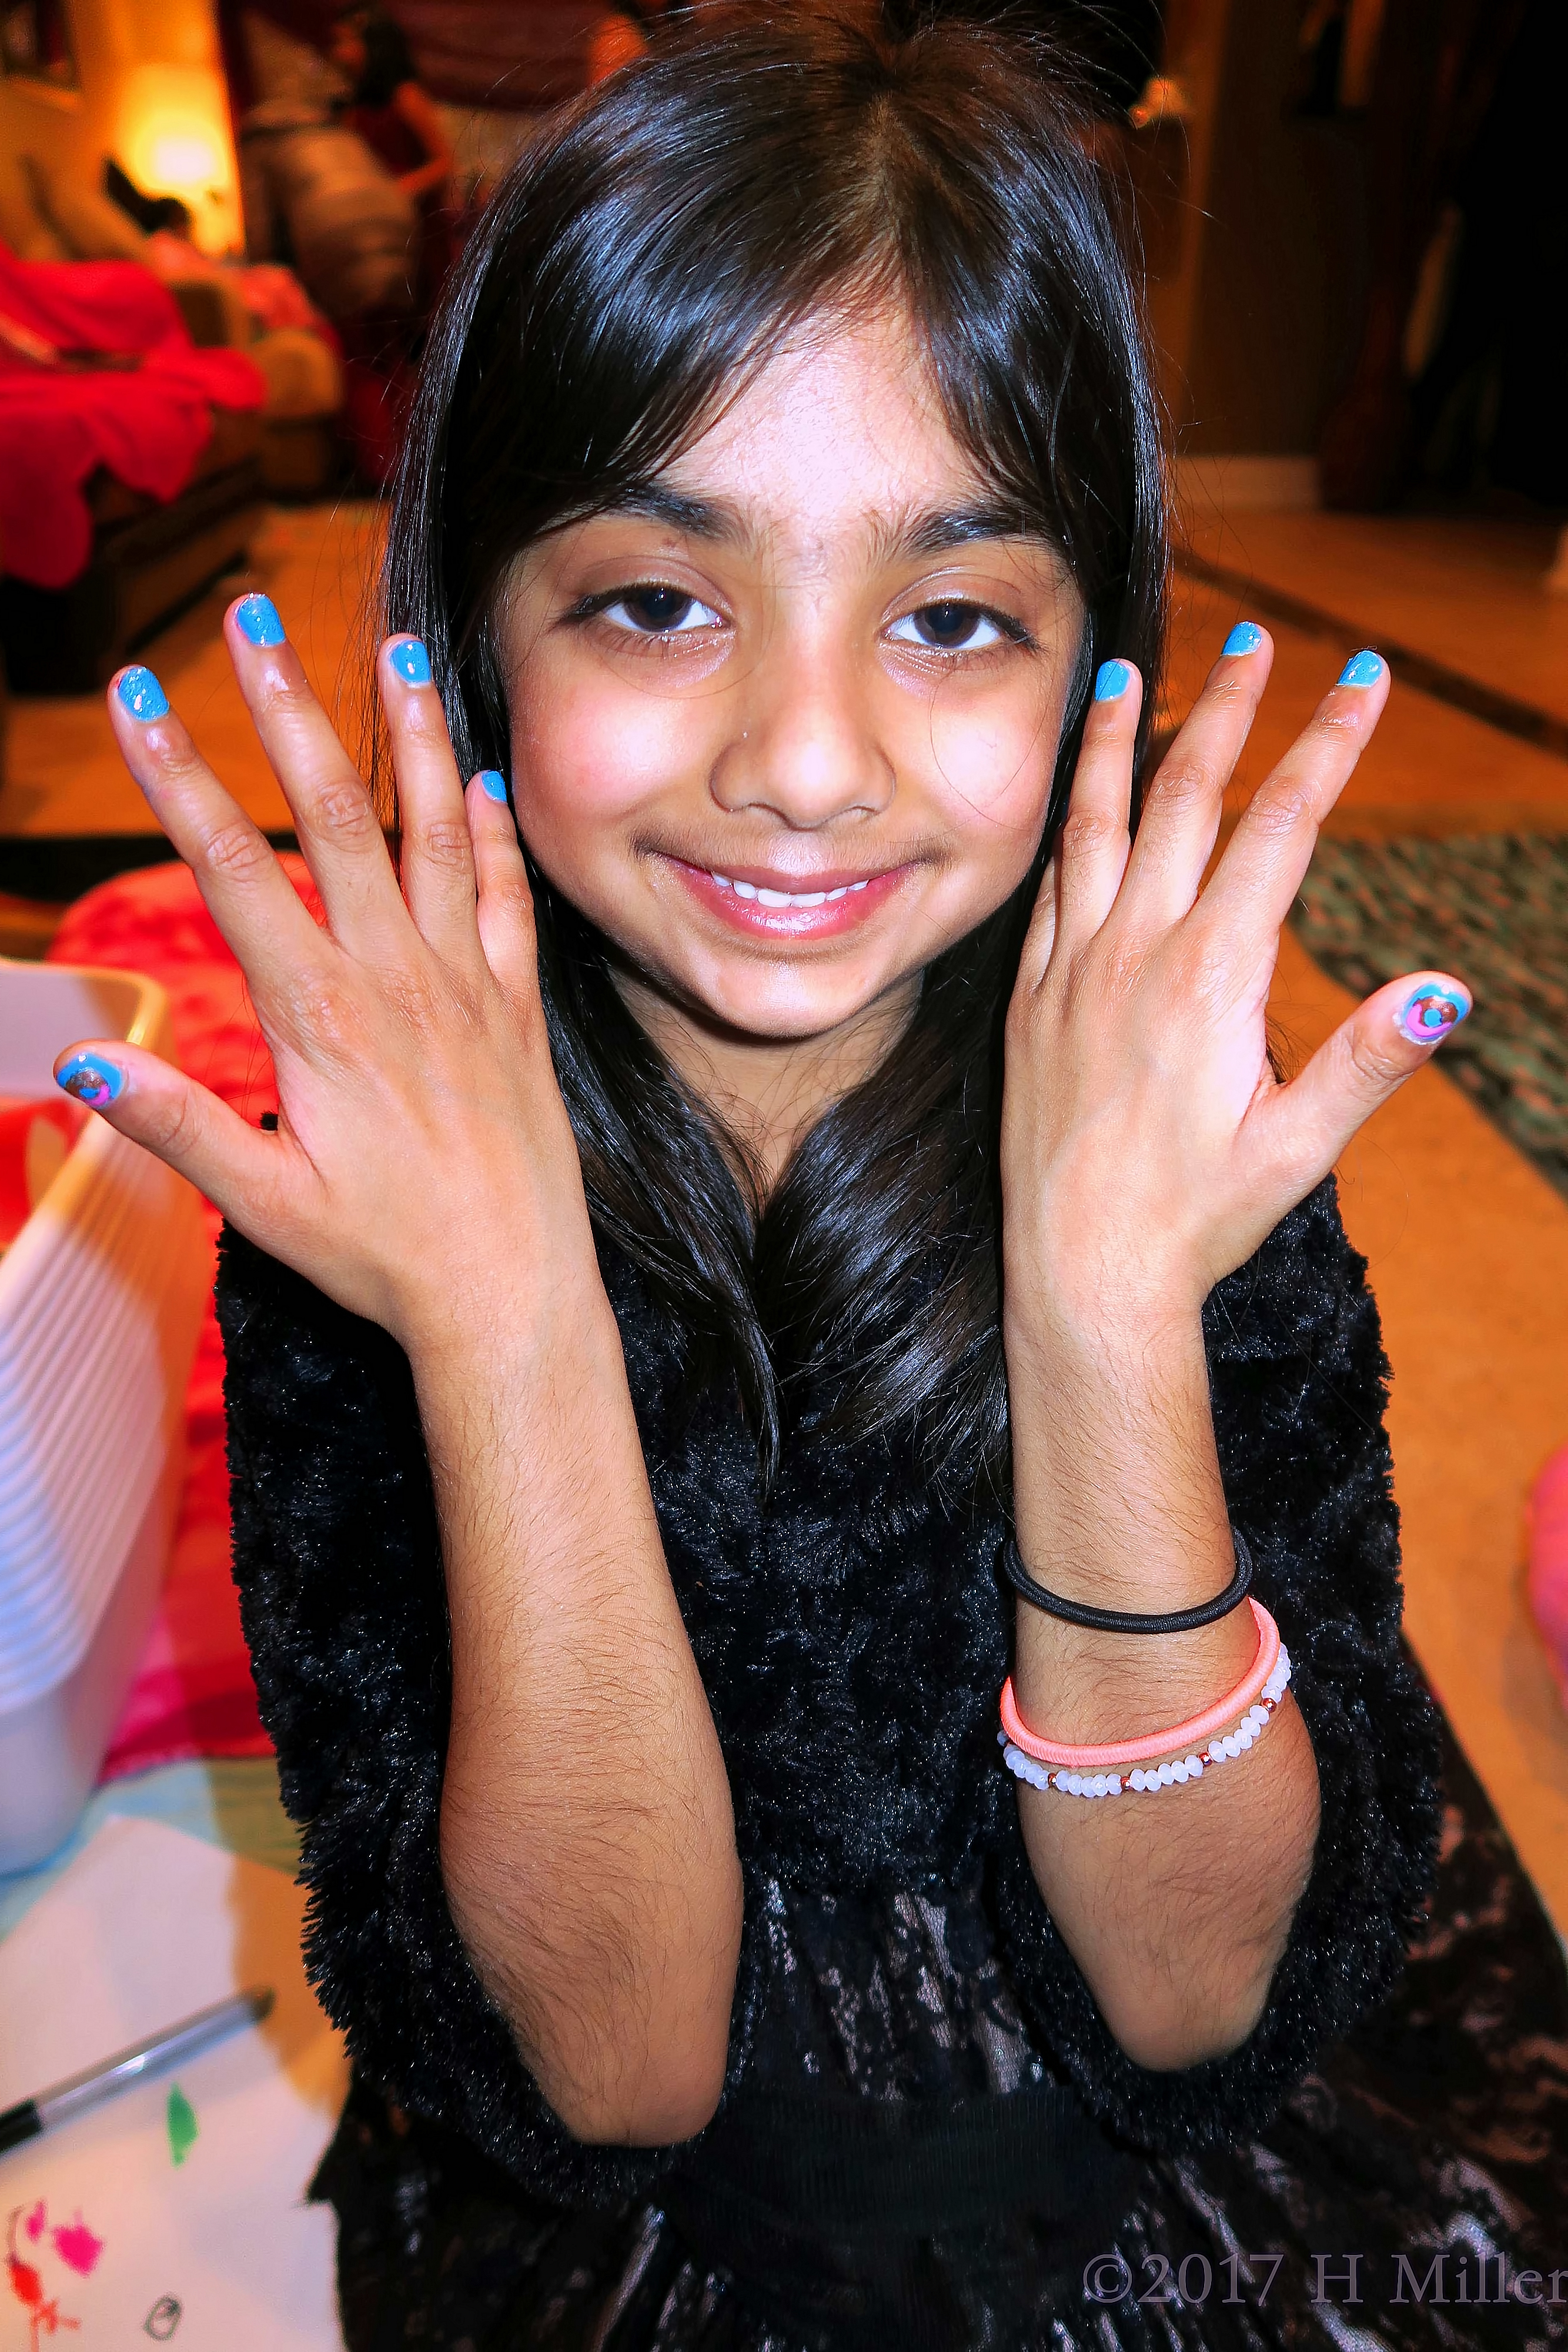 Smiling While Showing Her Mini Manicure At The Girls Spa!